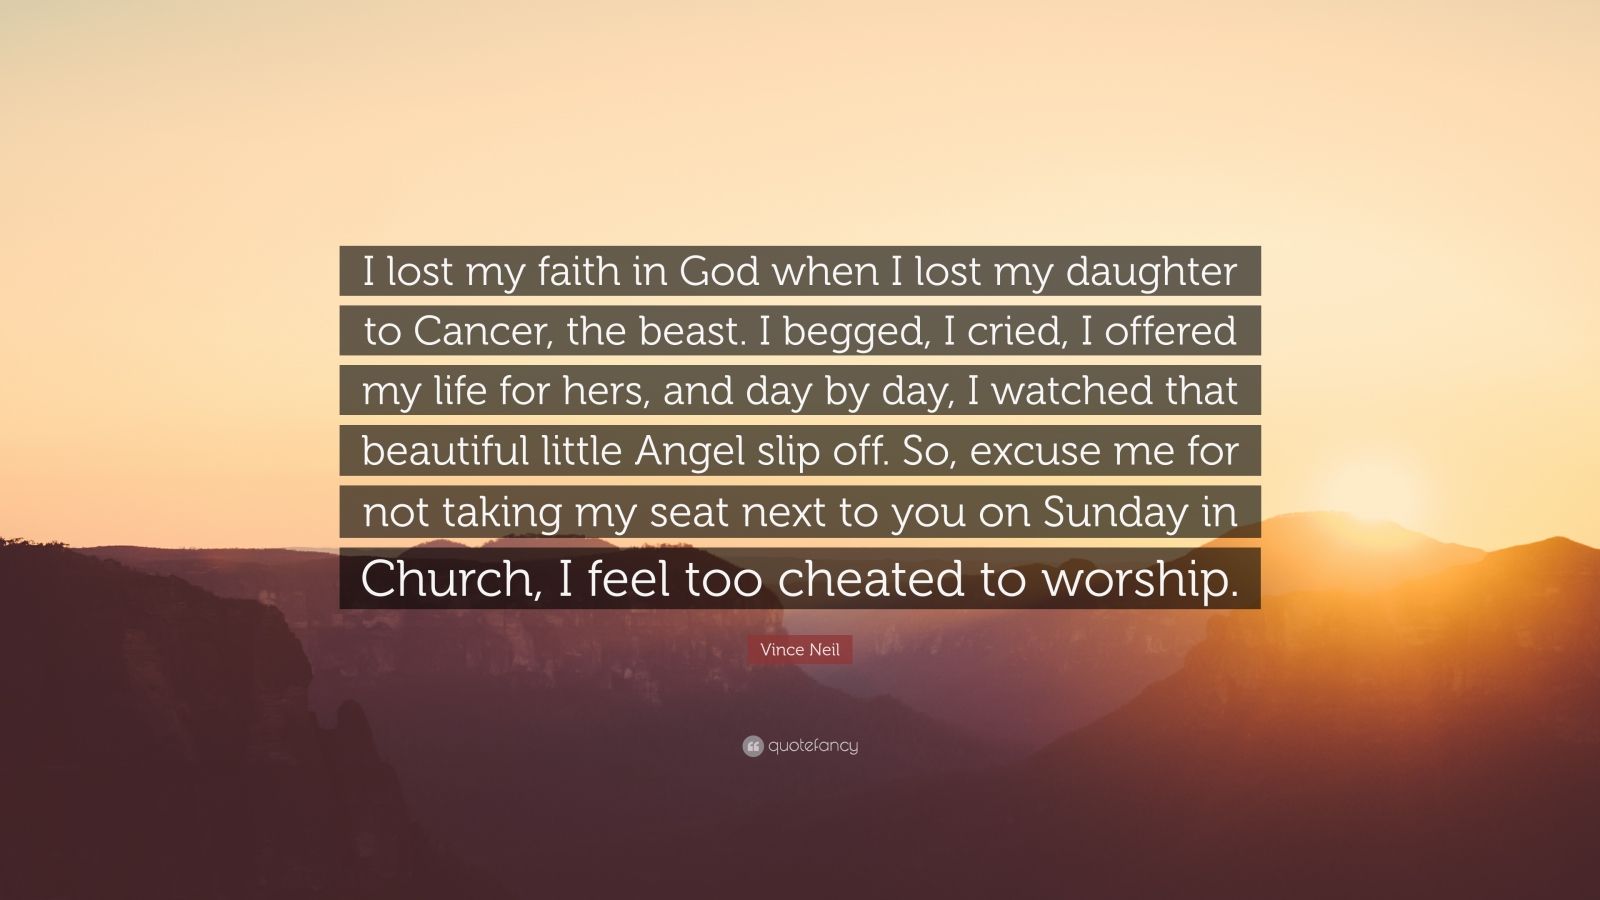 Vince Neil Quote: "I lost my faith in God when I lost my ...